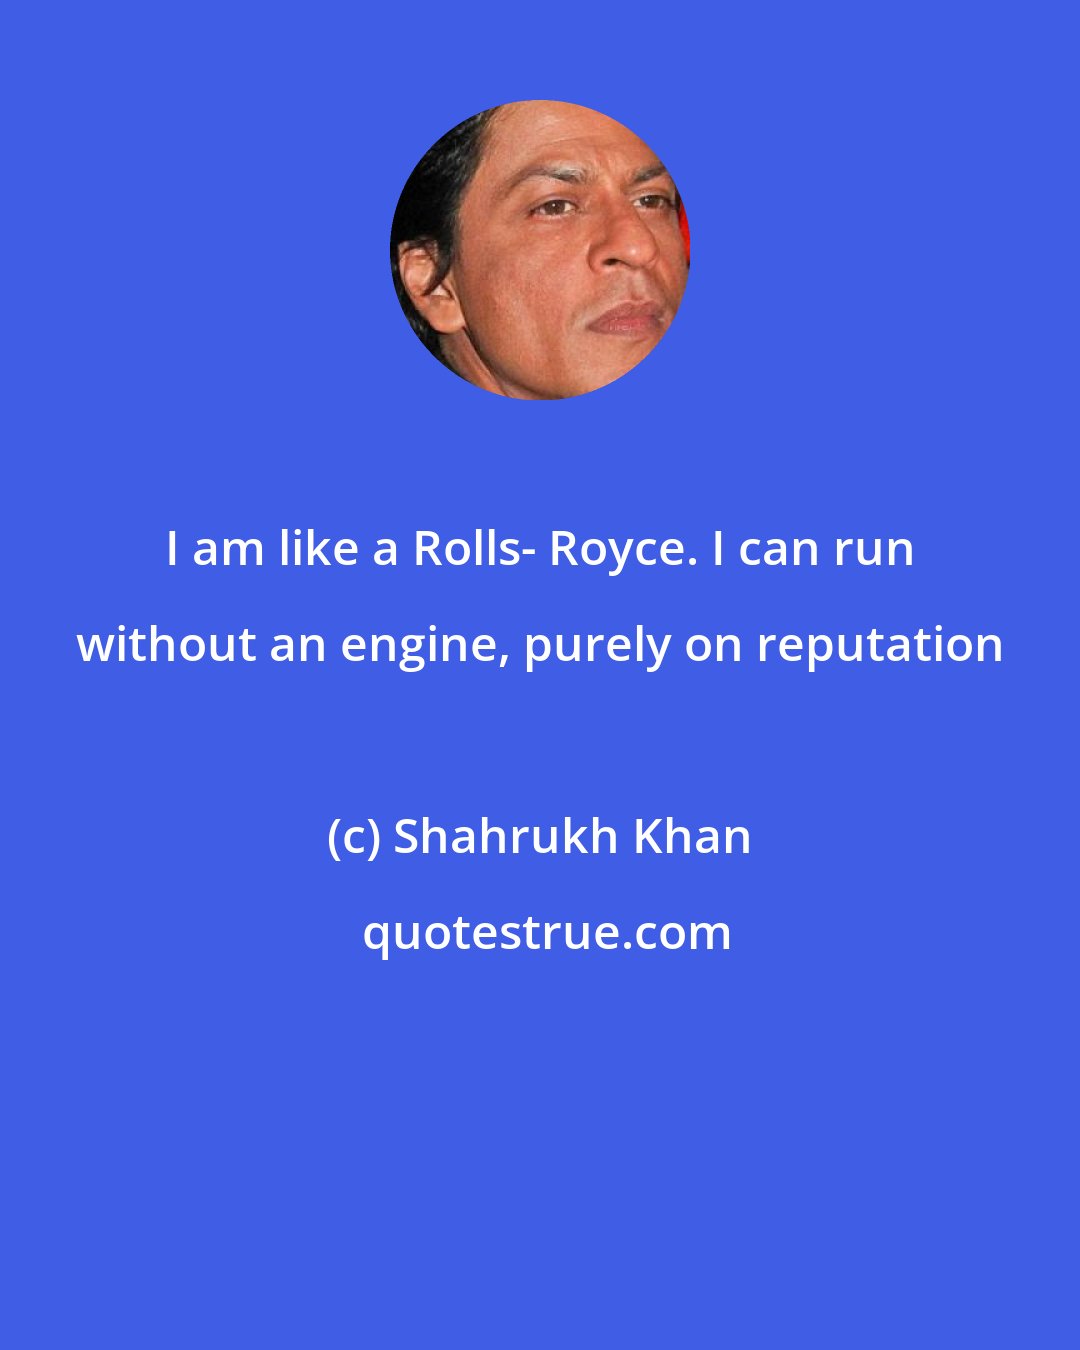 Shahrukh Khan: I am like a Rolls- Royce. I can run without an engine, purely on reputation